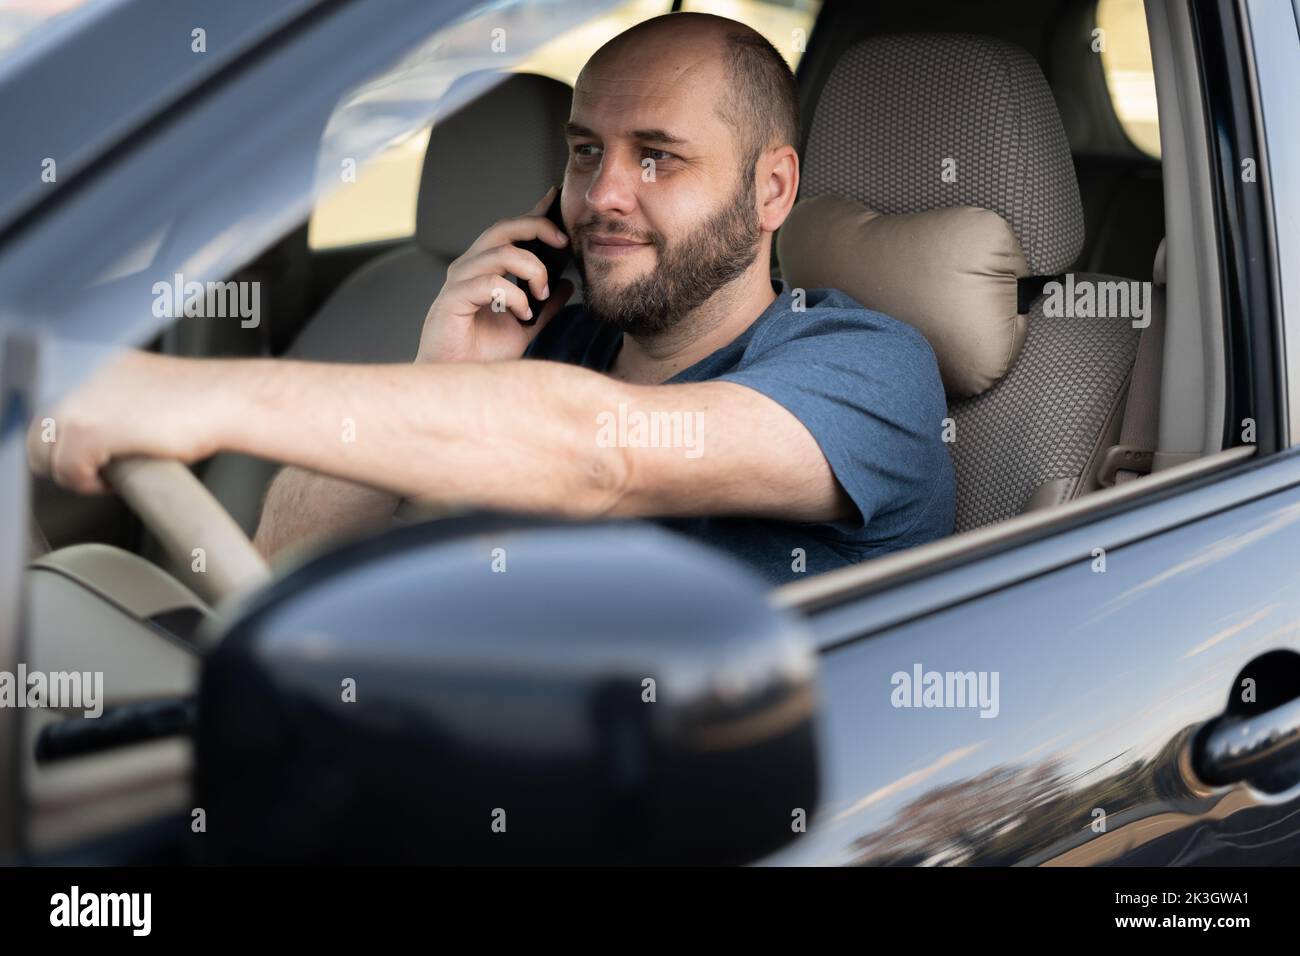 Portrait of smiling adult man driving car speaking on mobile phone. Stock Photo